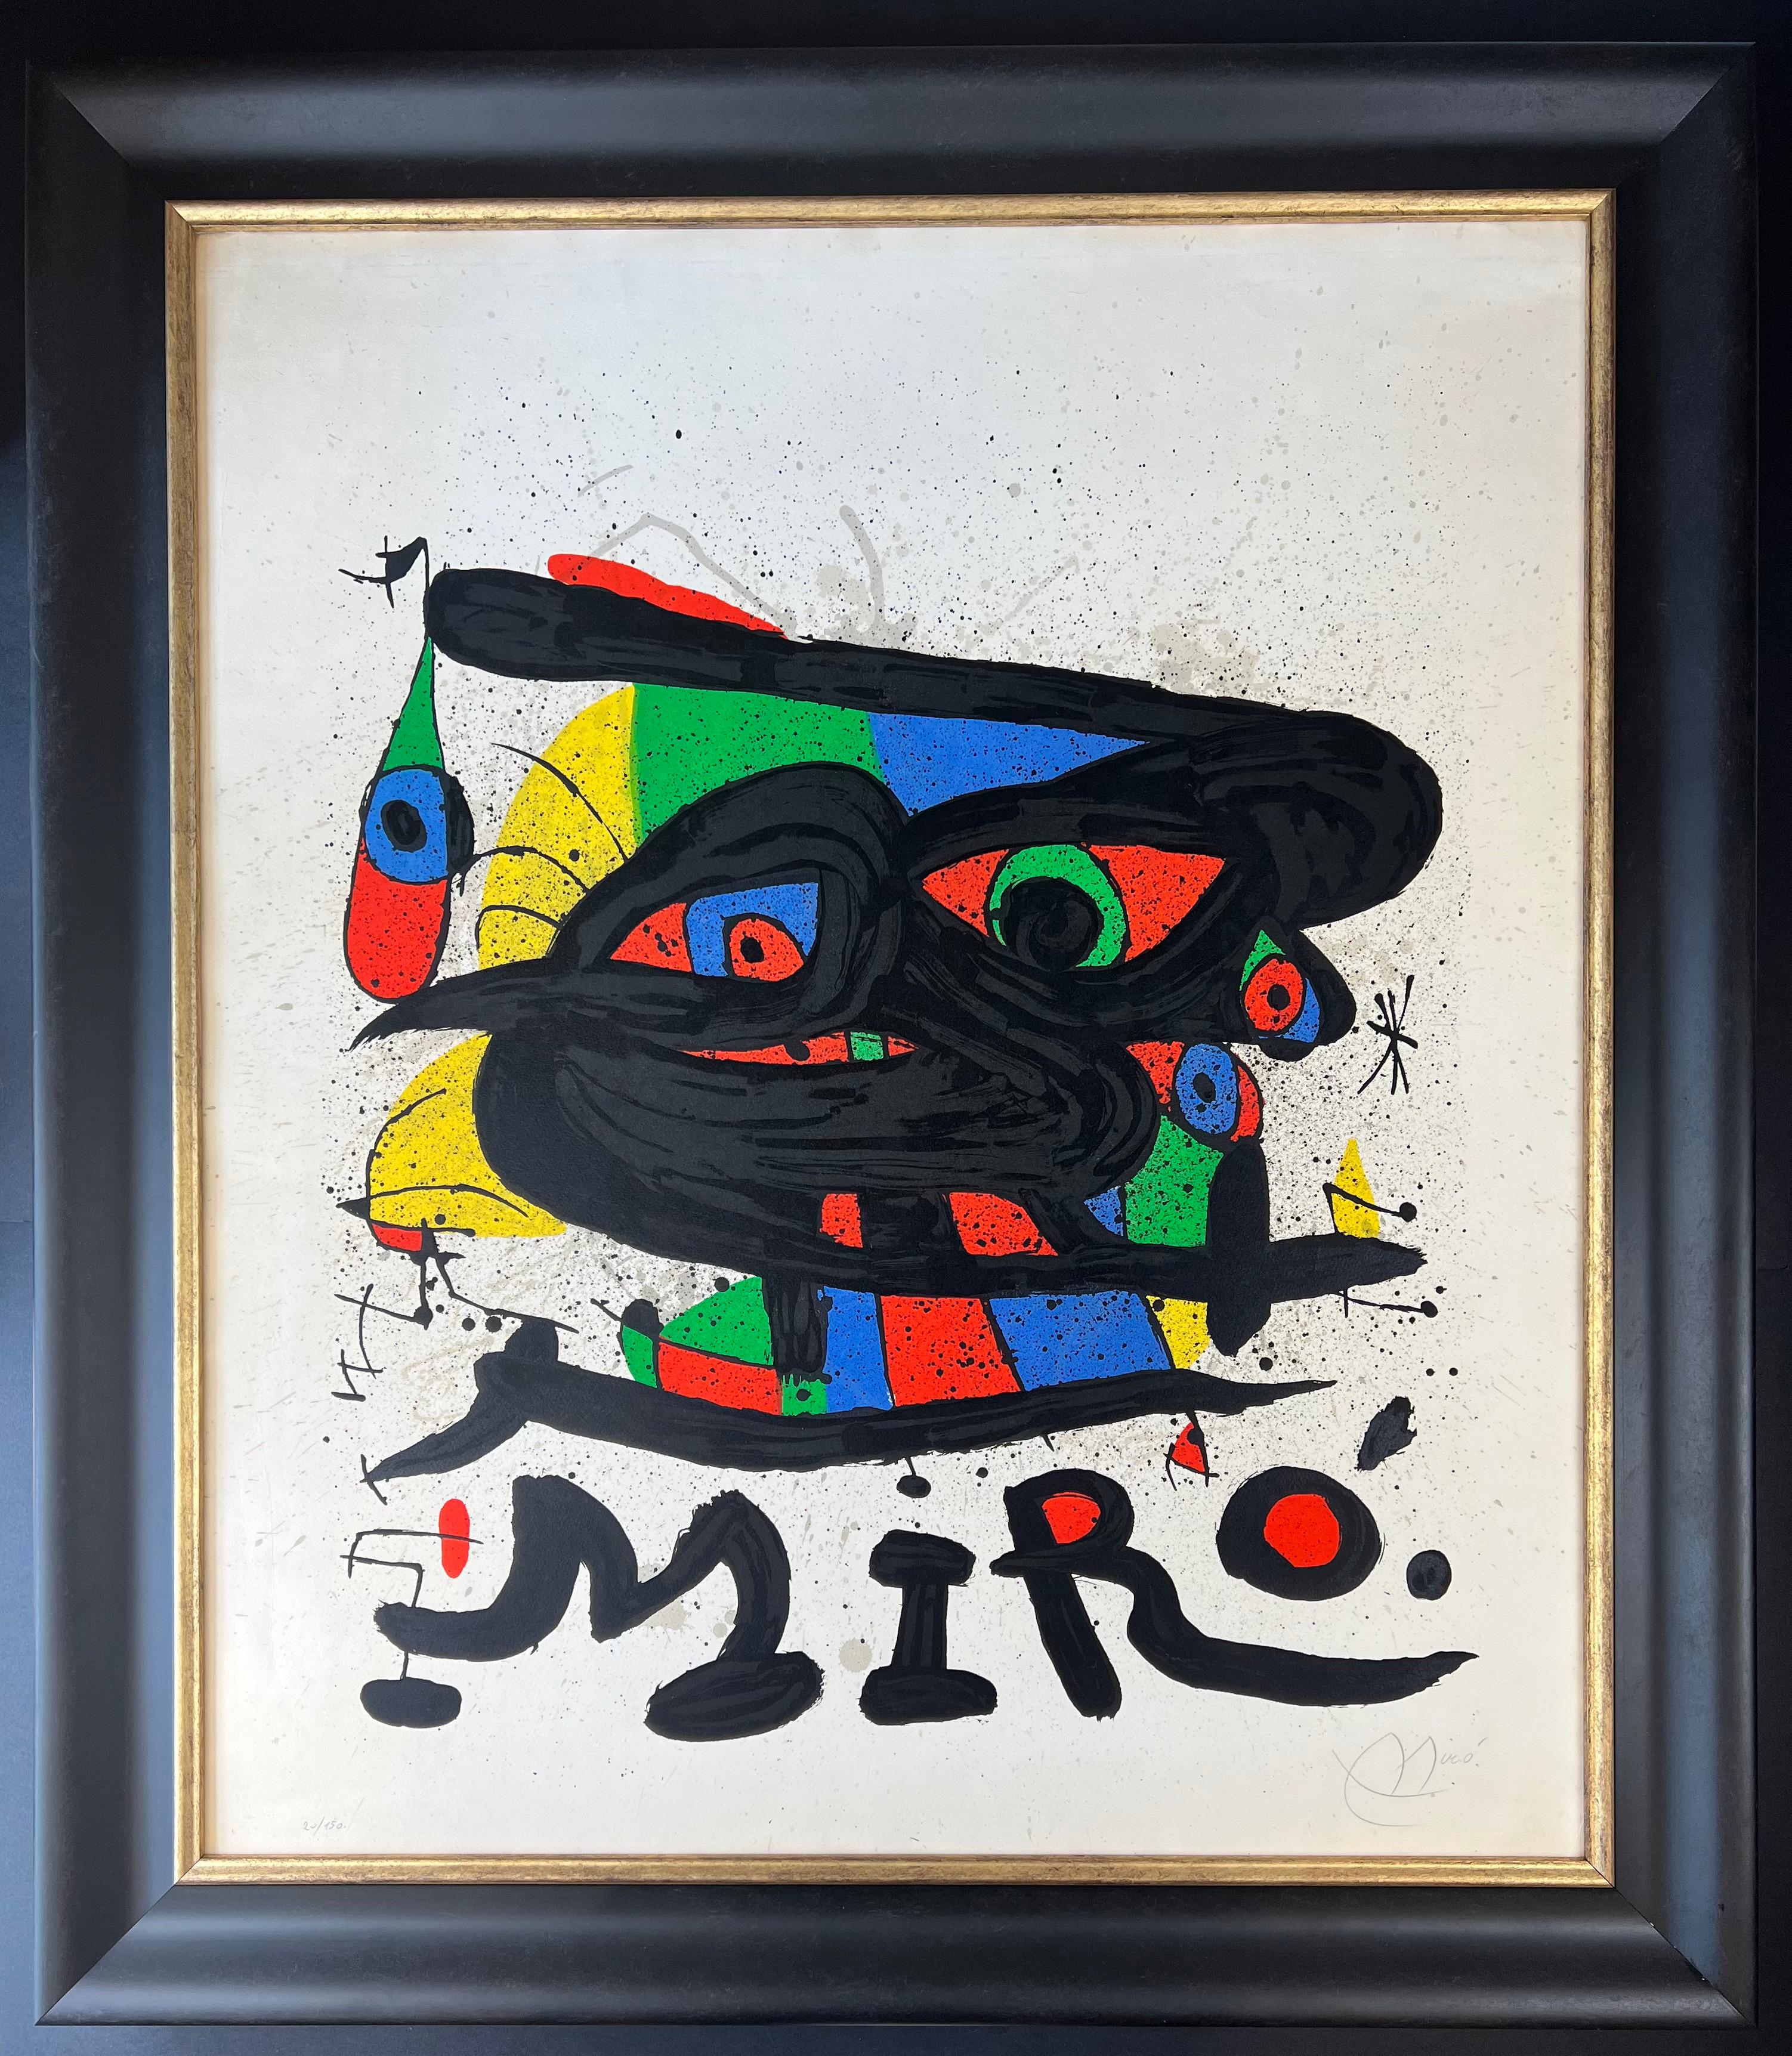 color lithograph on Arches paper , edited in 1971
Limited Edition of 150 copies
Hand signed in pencil by artist lower right and numbered  20/150 lower left
Paper size: 85,5 x 73 cm
Framed size: 100,5 x 88 cm

In very good conditions with deep,